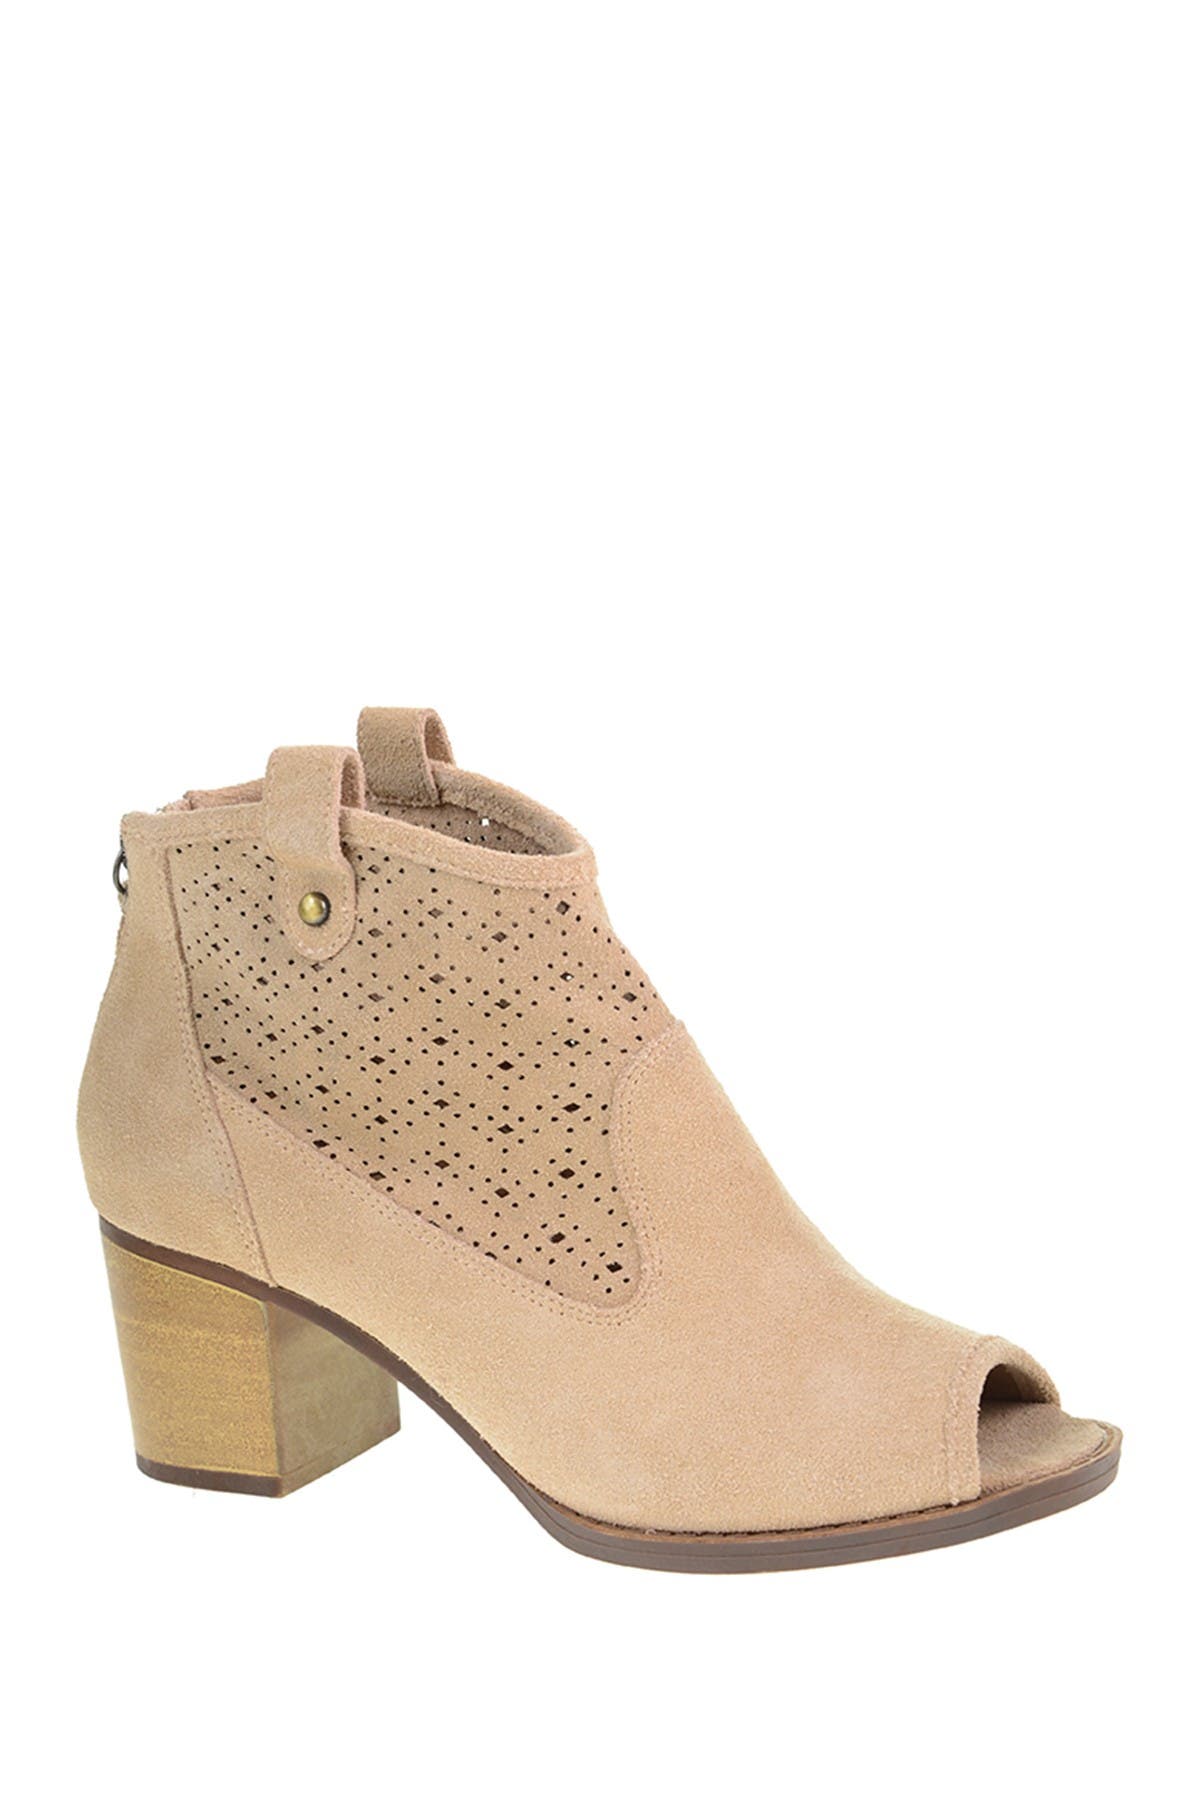 Dirty Laundry | Trixie Peep Toe Suede 